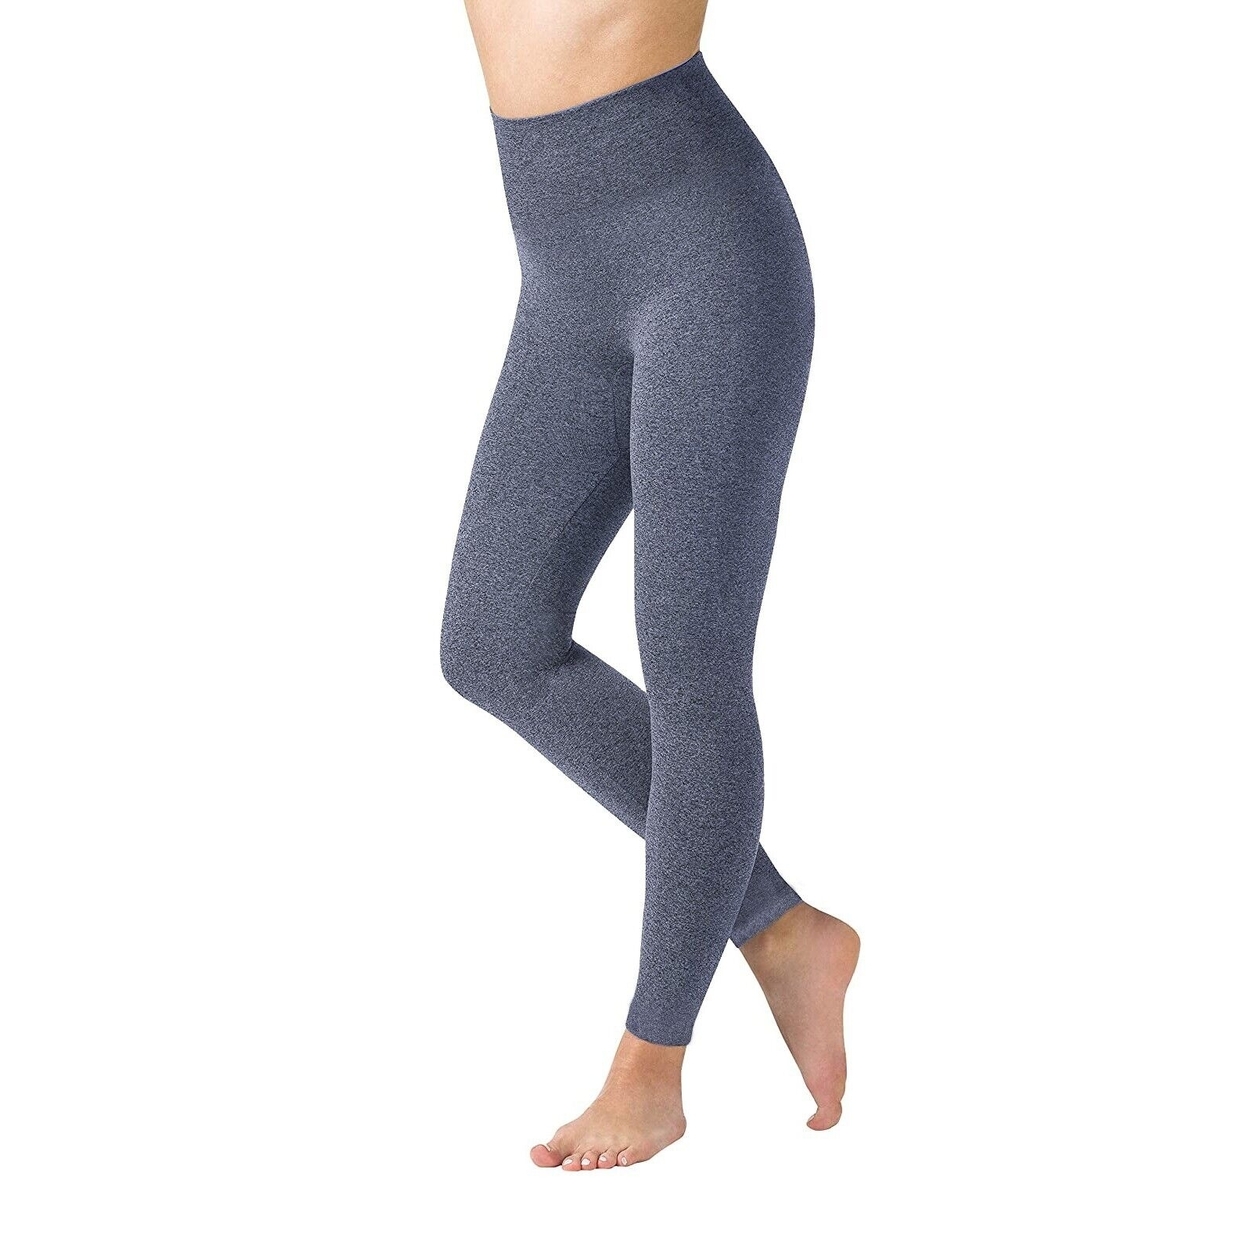 Multi-Packs Women High Waisted Fleece Lined Marled Leggings Ultra Soft Warm Pant - Charcoal/charcoal, 1, X-large